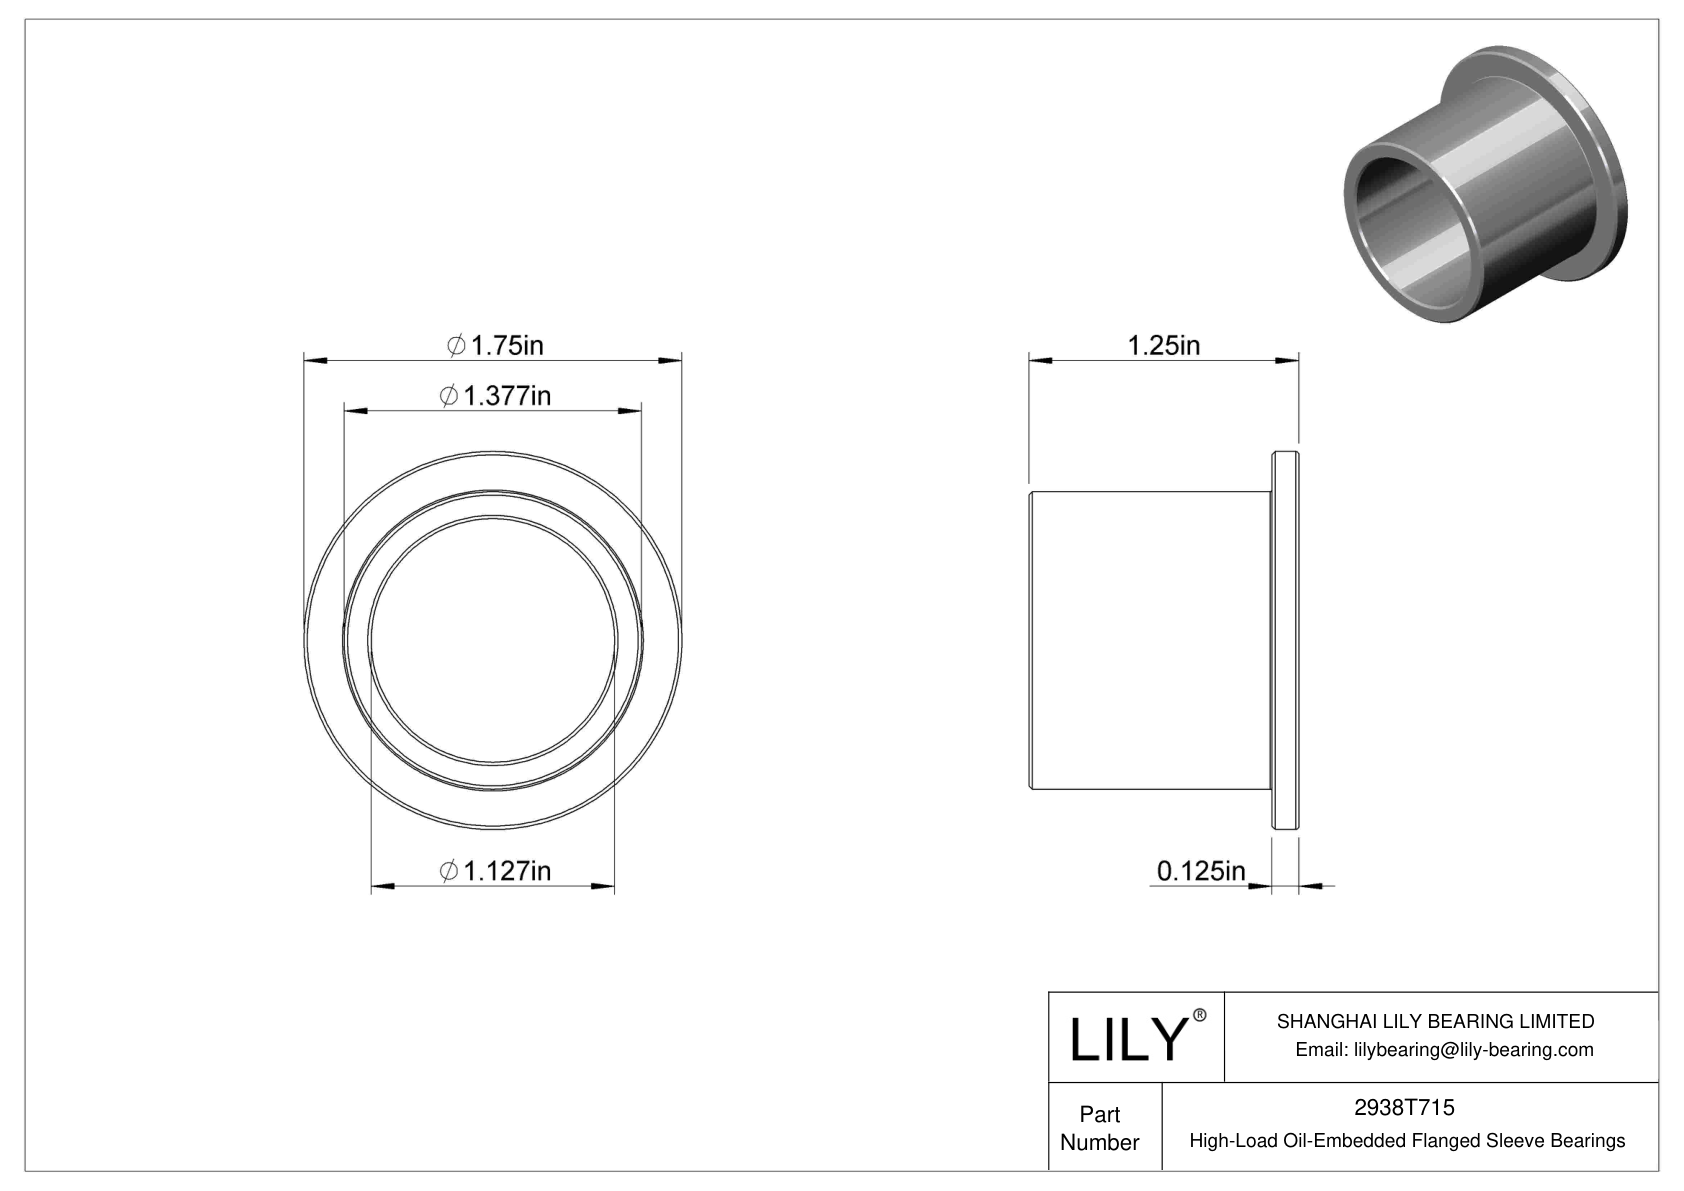 CJDITHBF High-Load Oil-Embedded Flanged Sleeve Bearings cad drawing